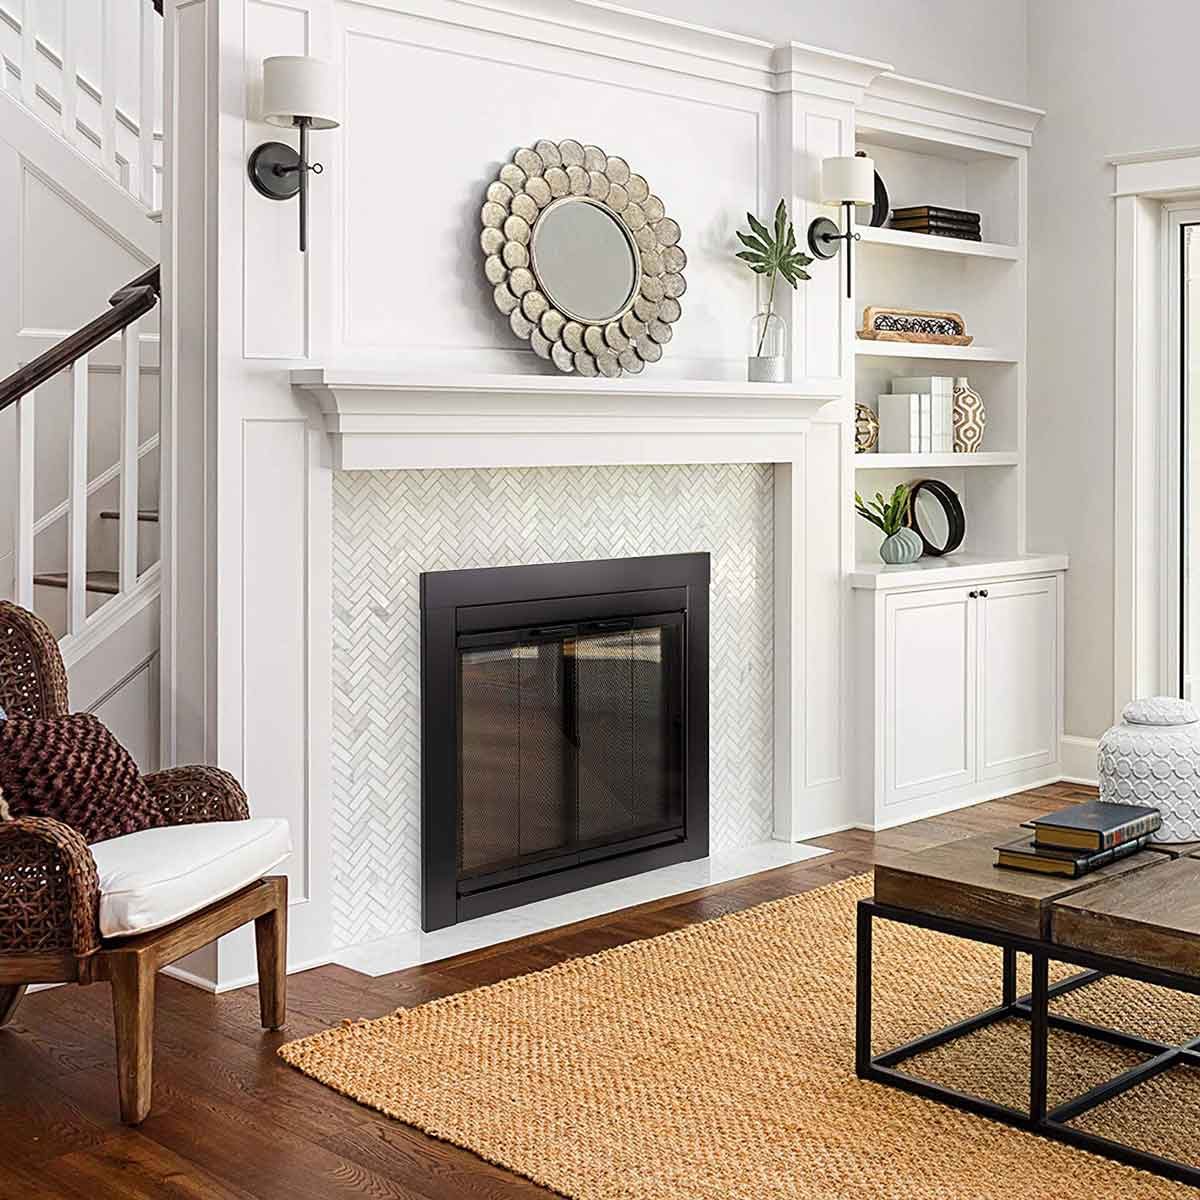 How to Seal an Unused Fireplace and Save Money on Heating Bills - Dengarden